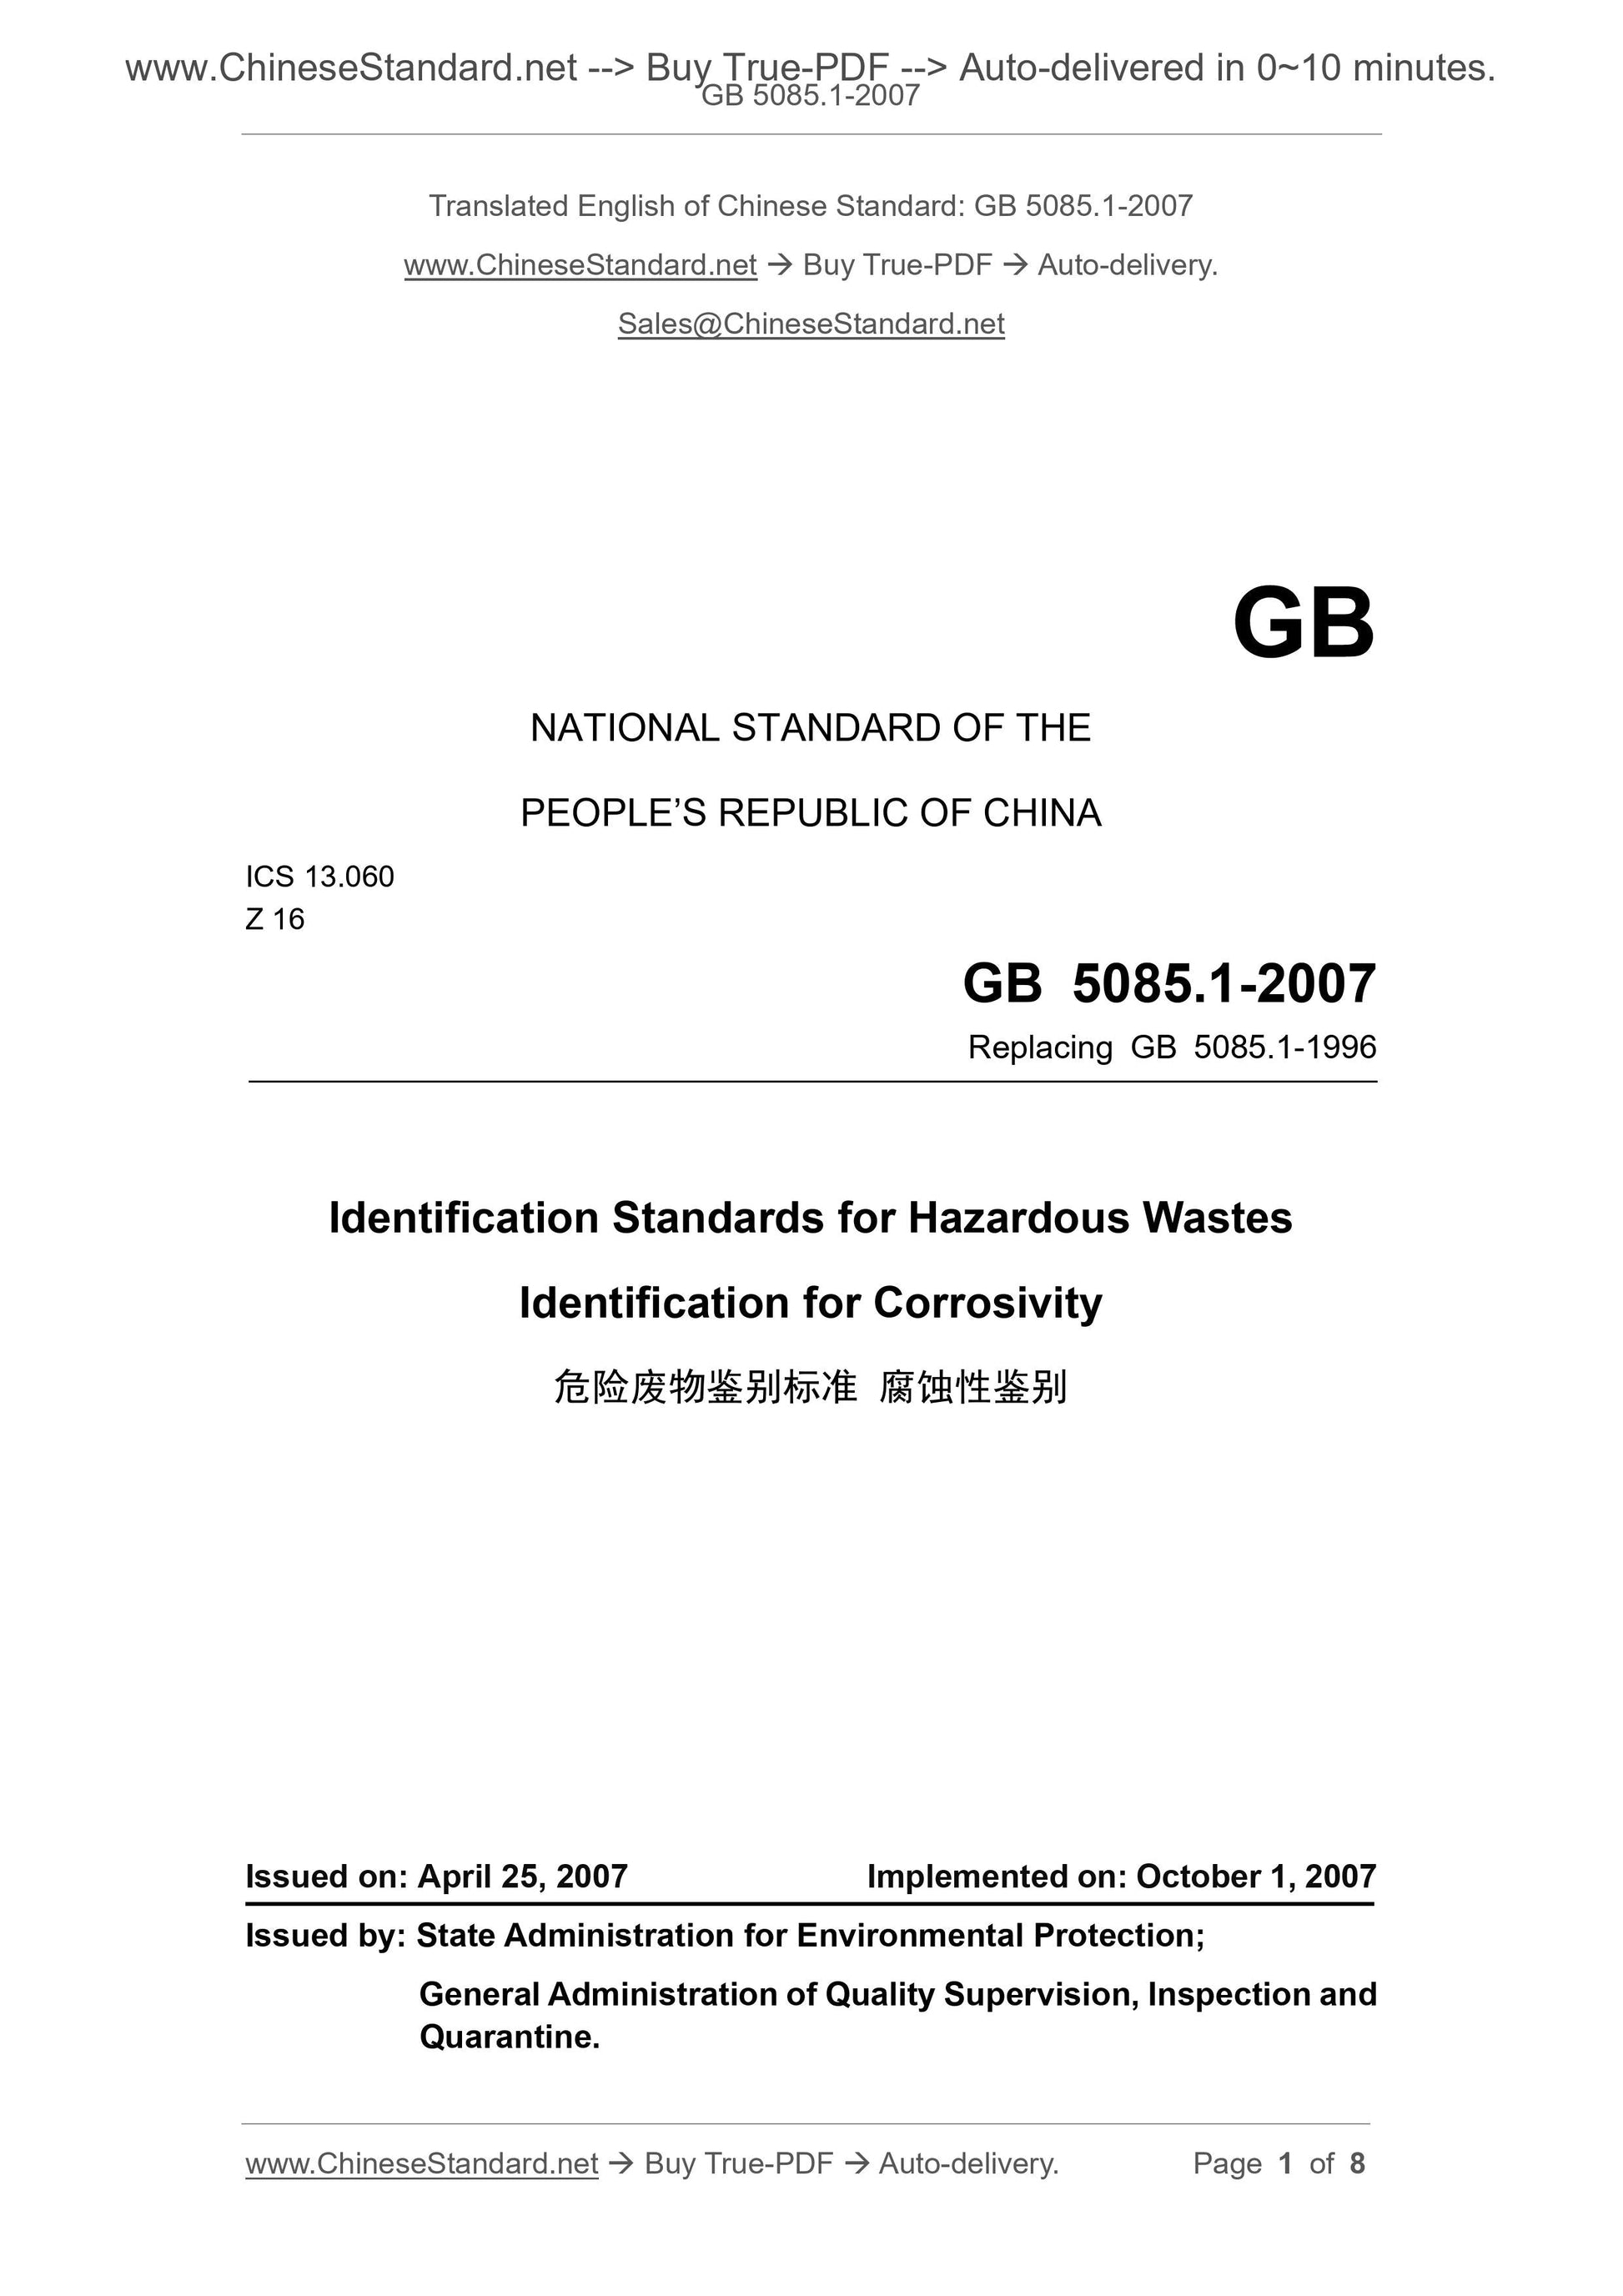 GB 5085.1-2007 Page 1